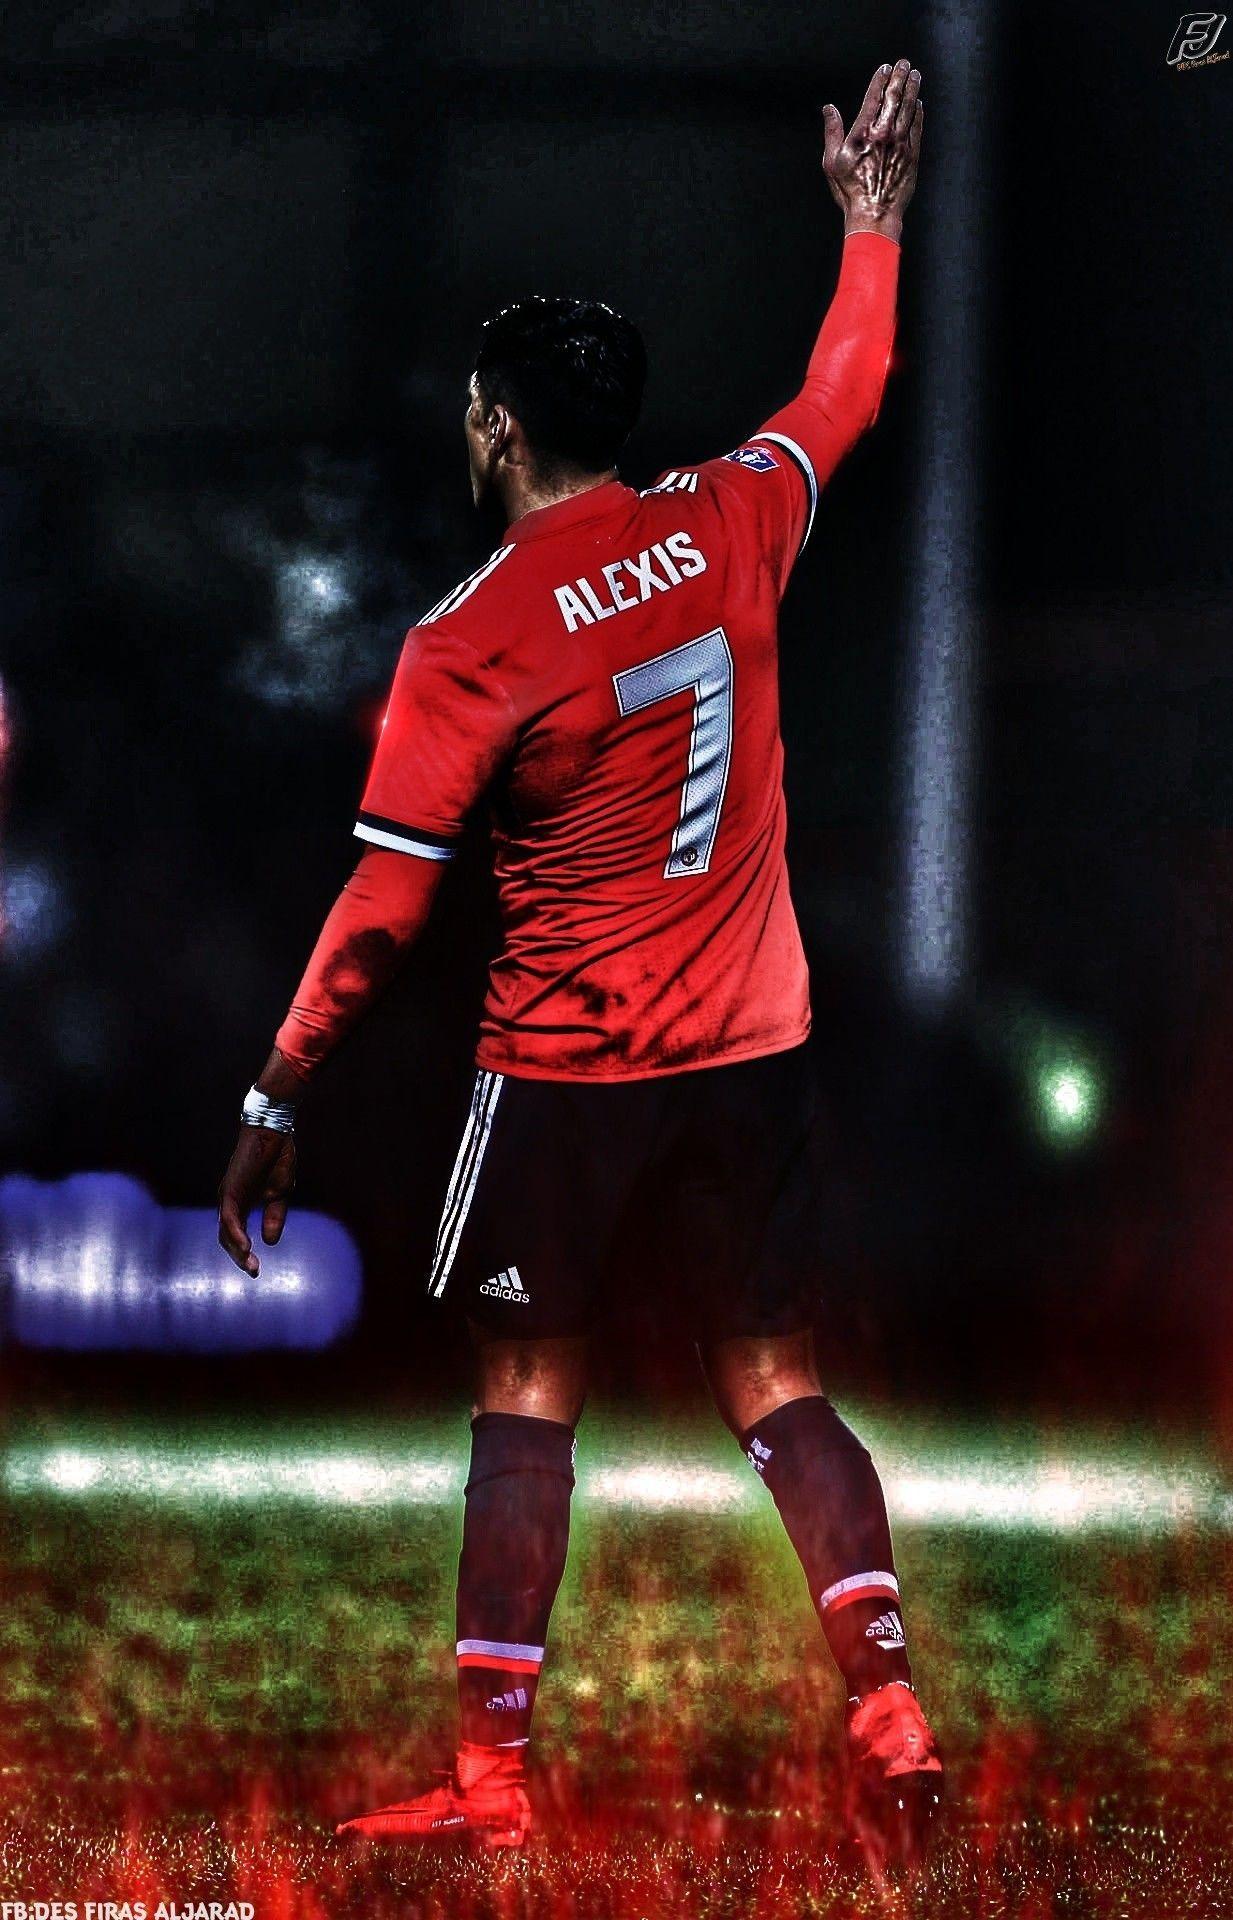 Alexis Sanchez WALLPAPER #soccertips. Soccer is Awesome. Alexis